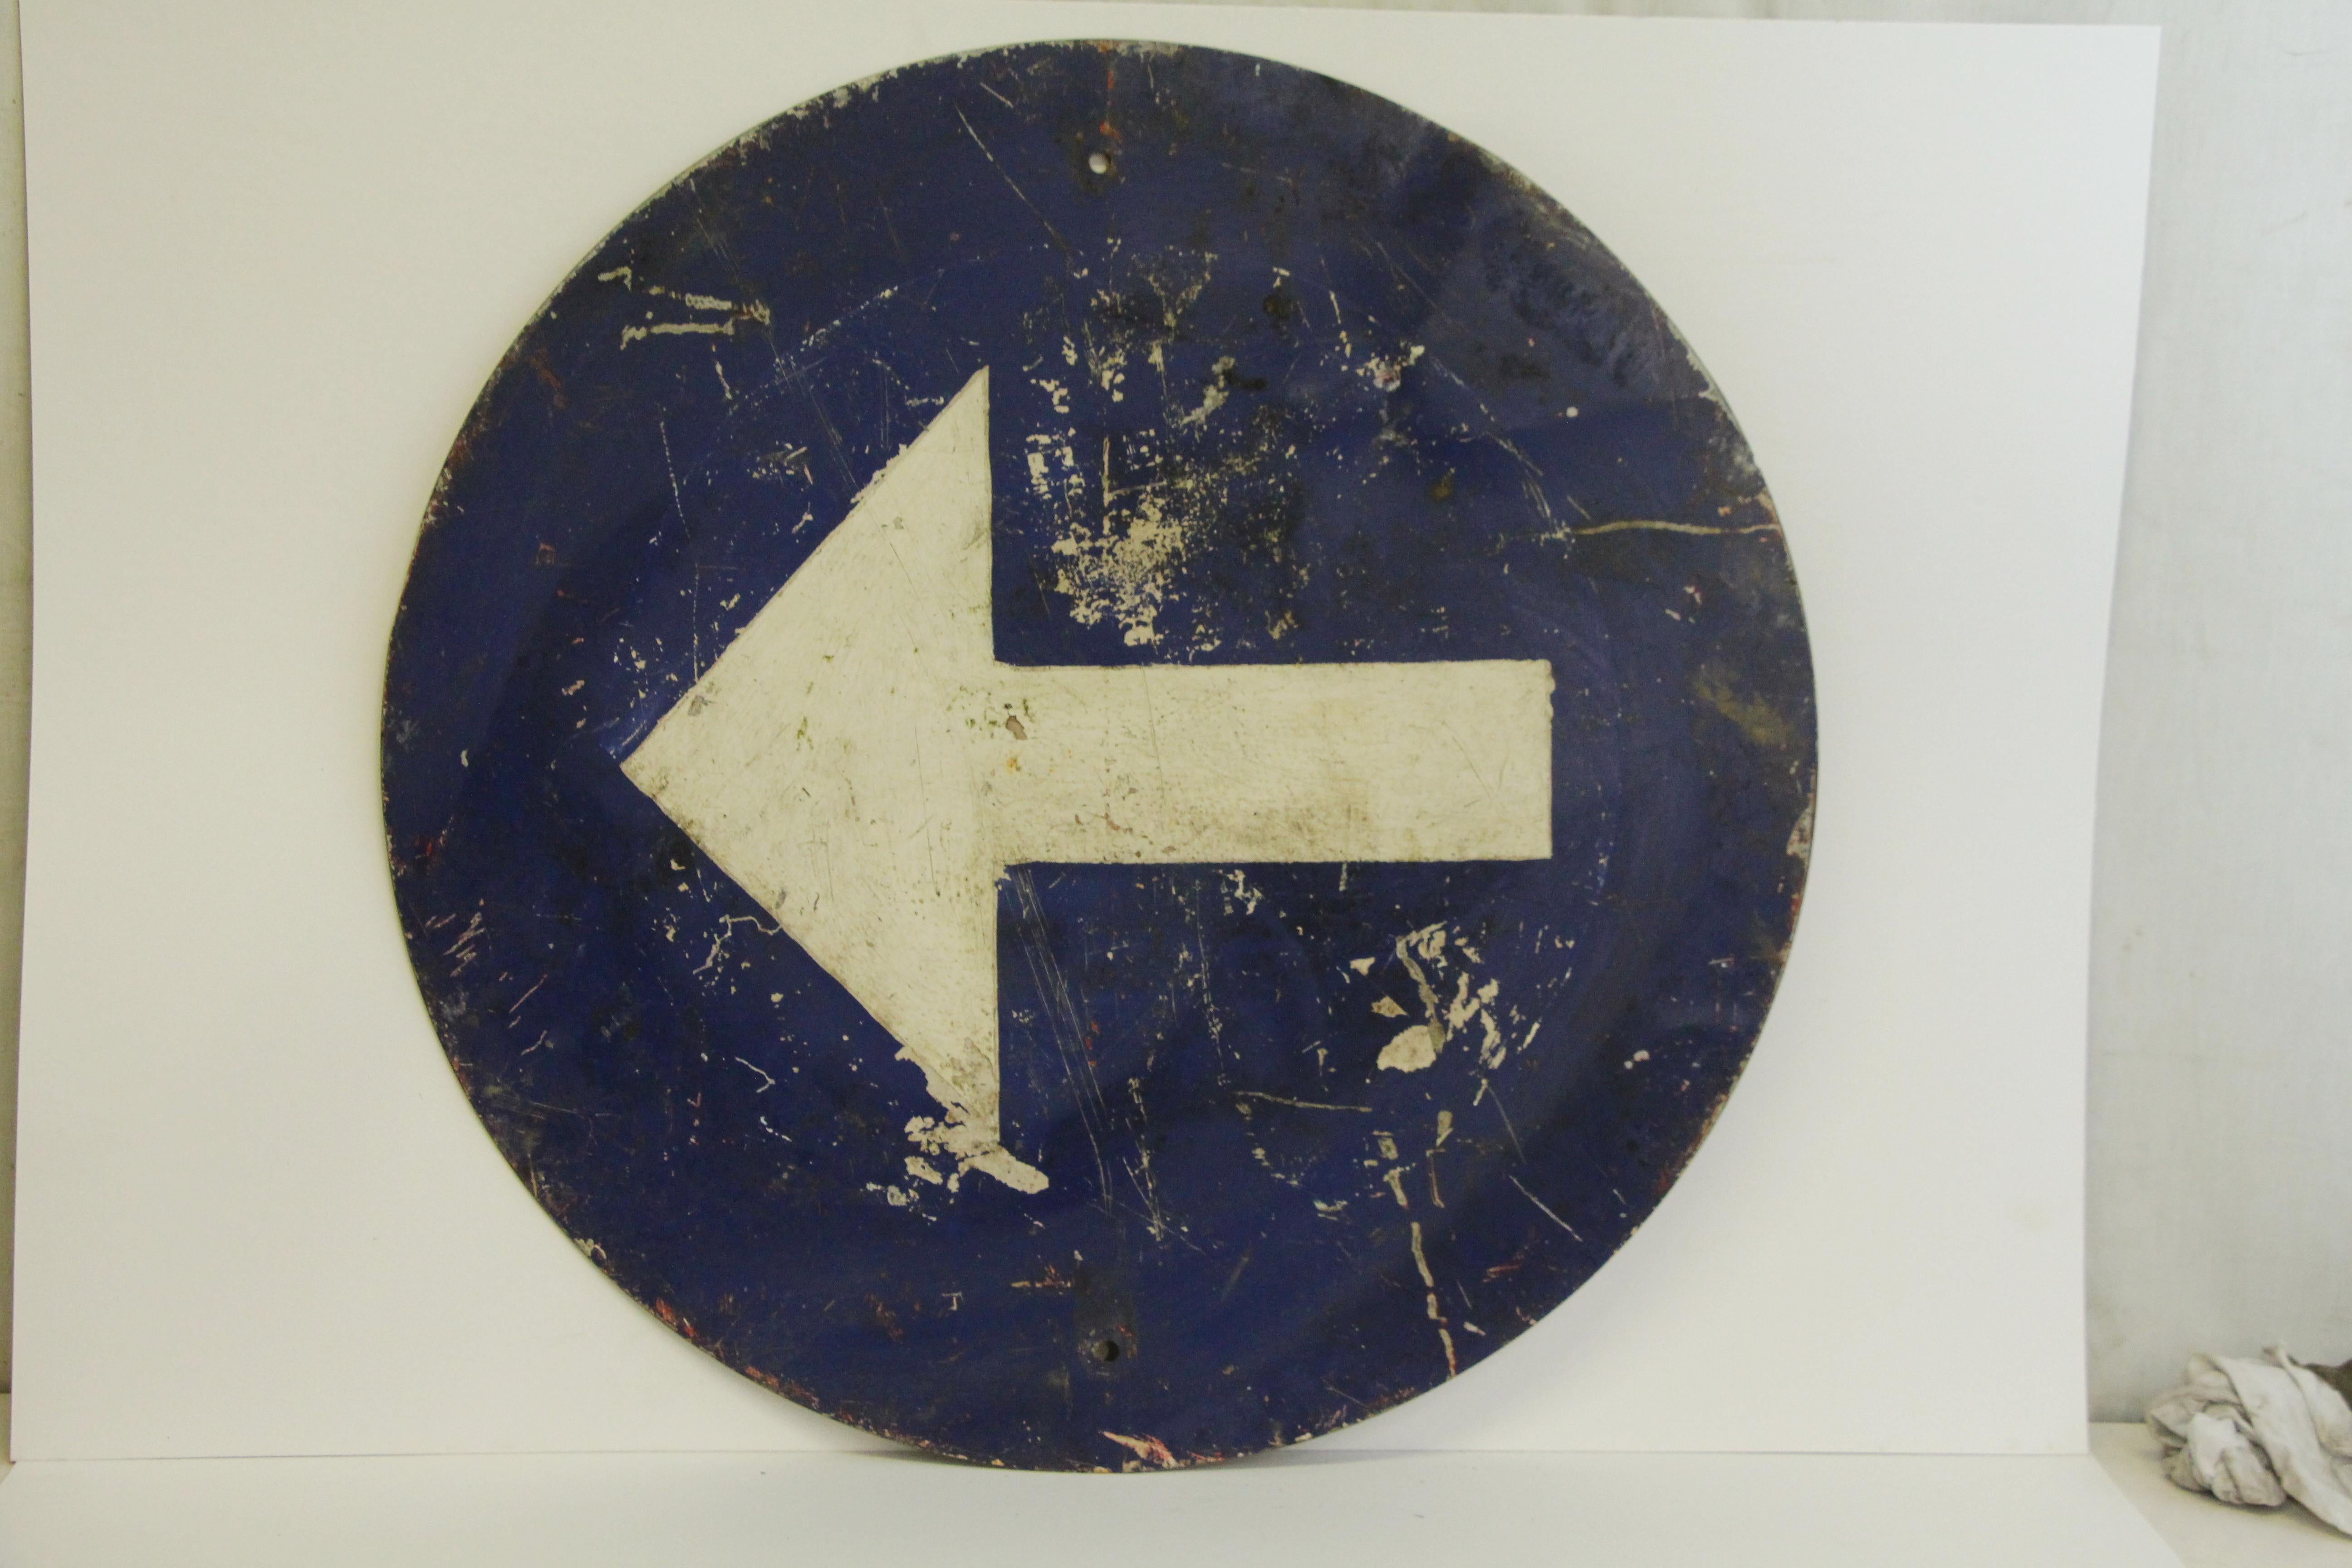 Belgian 1970s Belgium Blue and White Arrow Direction Road or Street Sign